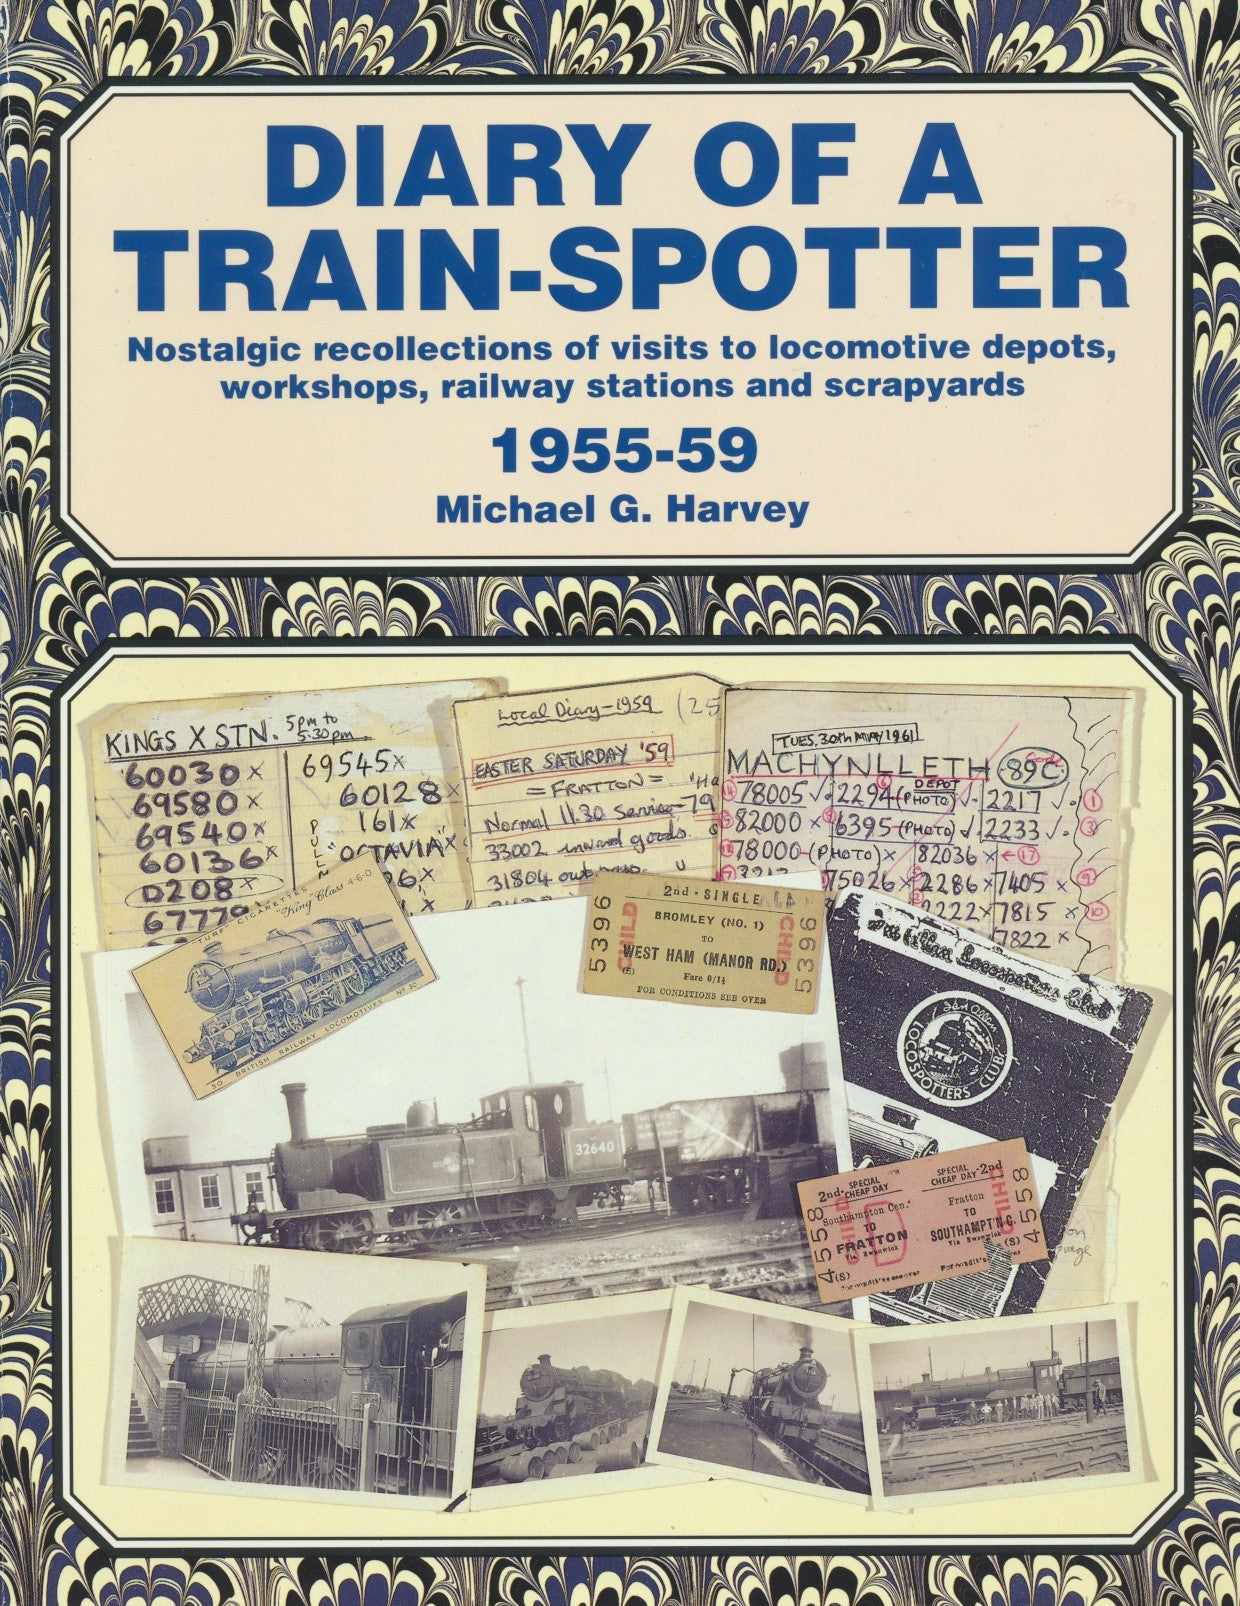 Diary of a Train-Spotter: Nostalgic Recollections of Visits to Locomotive Depots, Workshops, Railway Stations and Scrapyards: 1955-59 Vol 1